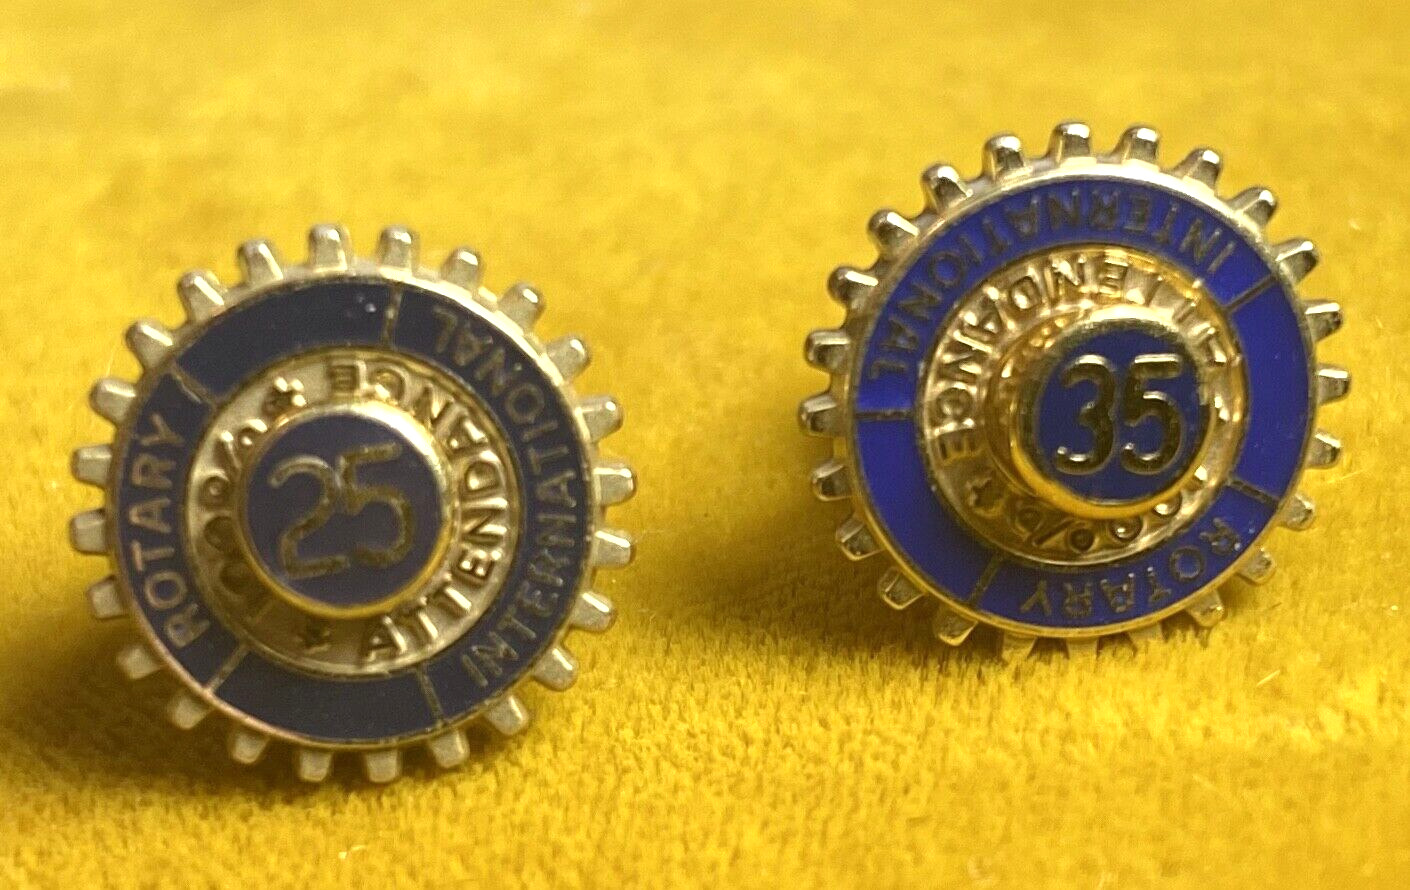 2 Vintage ROTARY INTERNATIONAL 10K Gold Filled Lapel Pins, 25 & 35 Years Service